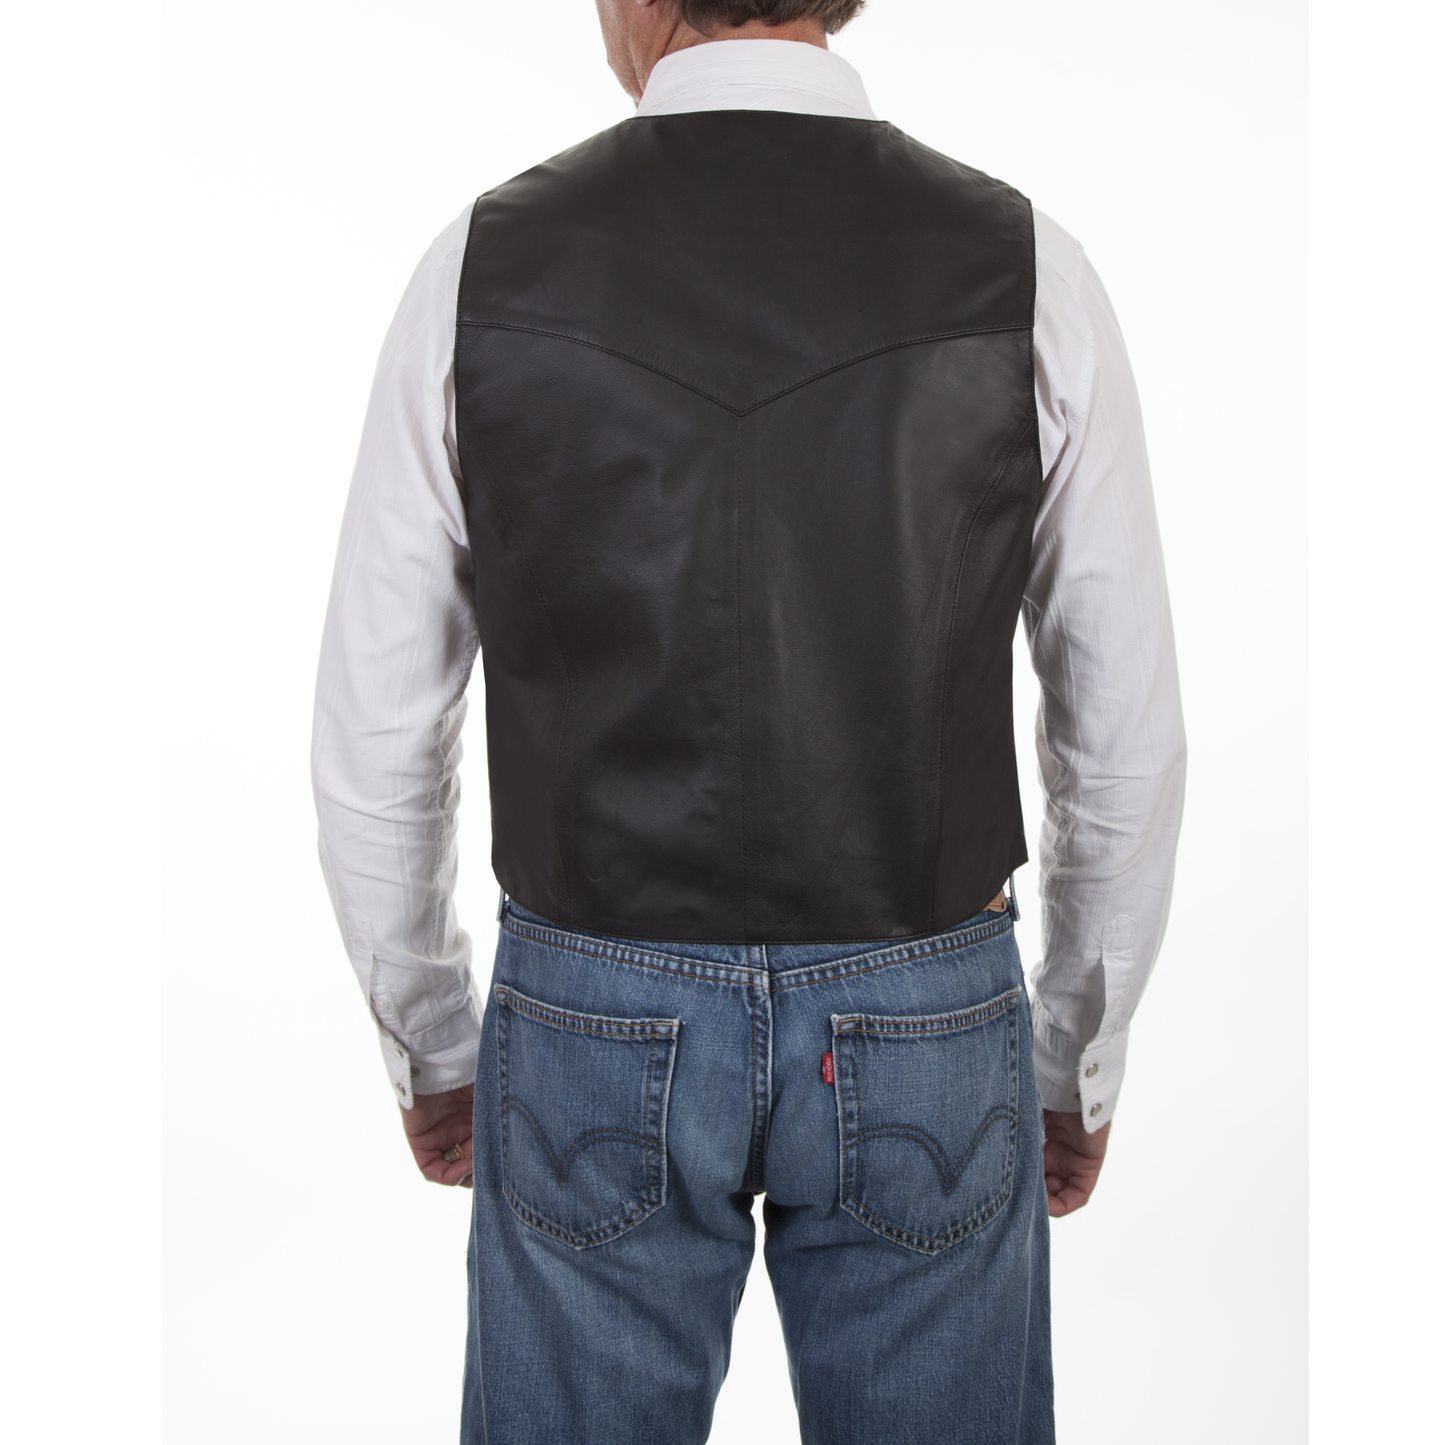 Scully Men's Classic Soft Touch Lamb Black Leather Vest 507-144